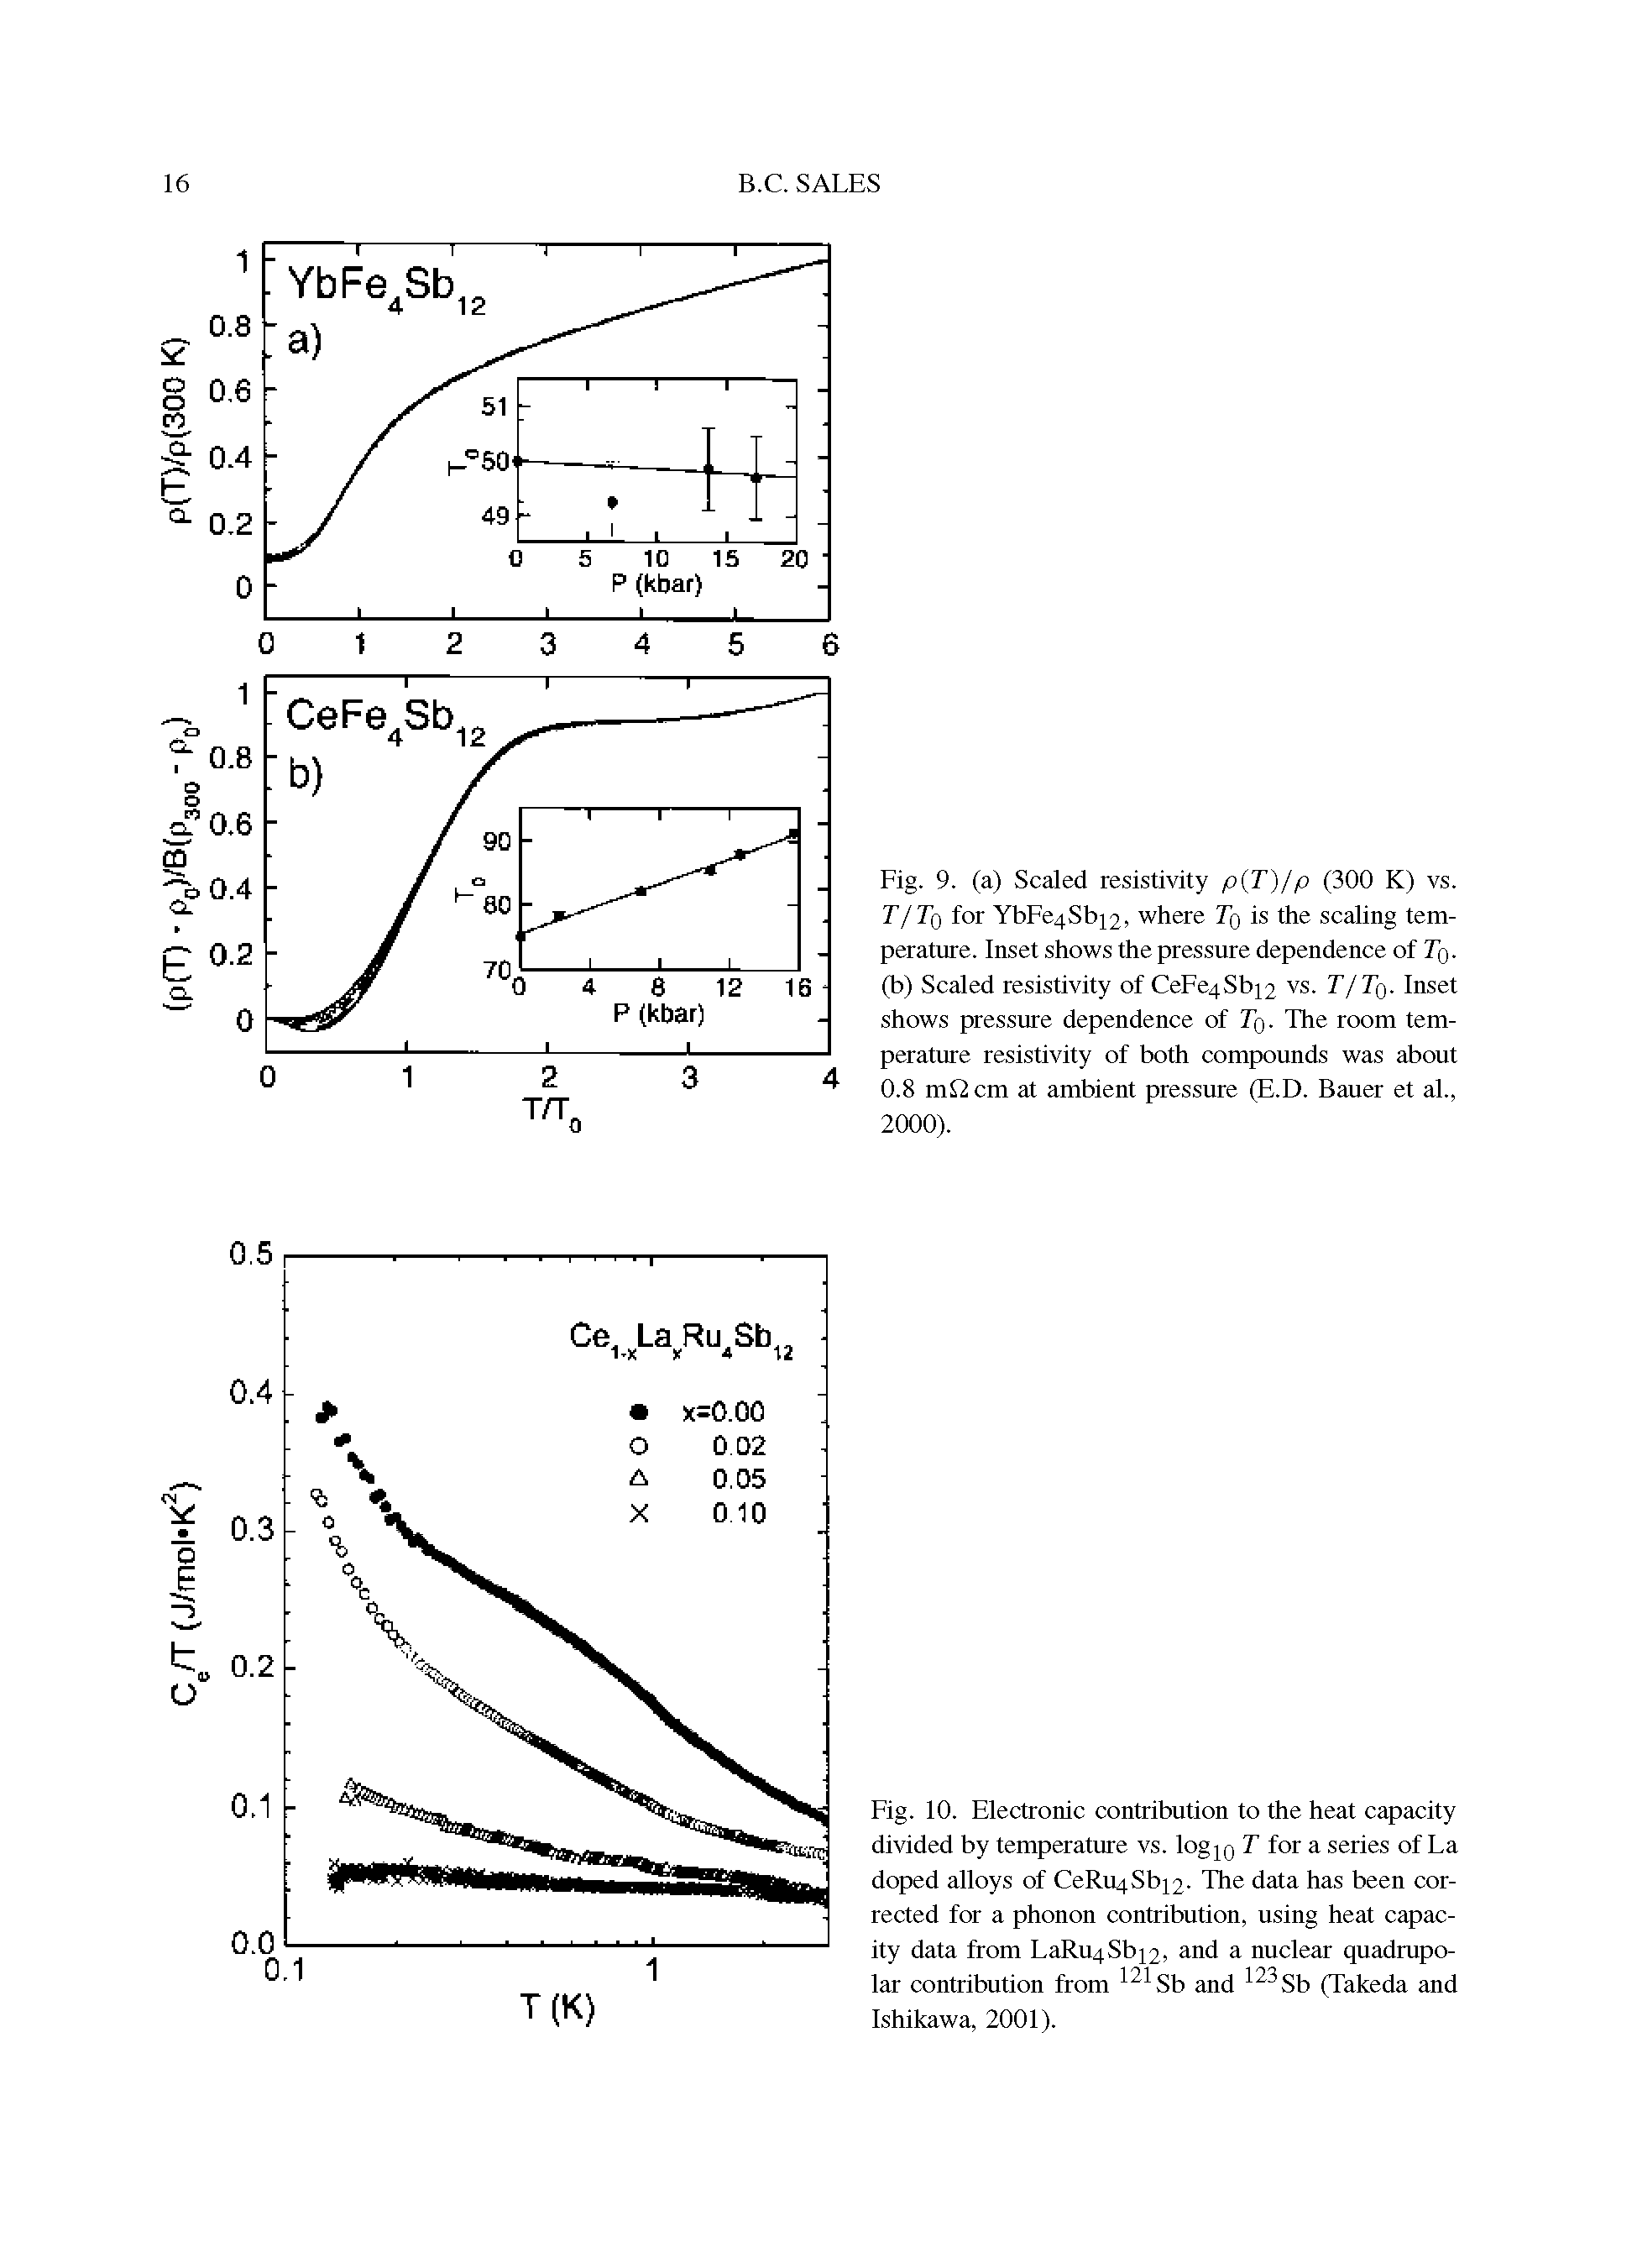 Fig. 10. Electronic contribution to the heat capacity divided by temperature vs. log Q T for a series of La doped alloys of CeR Sb]. The data has been corrected for a phonon contribution, using heat capacity data from LaRr Sb] and a nuclear quadrupo-lar contribution from 121 Sb and 123 Sb (Takeda and Ishikawa, 2001).